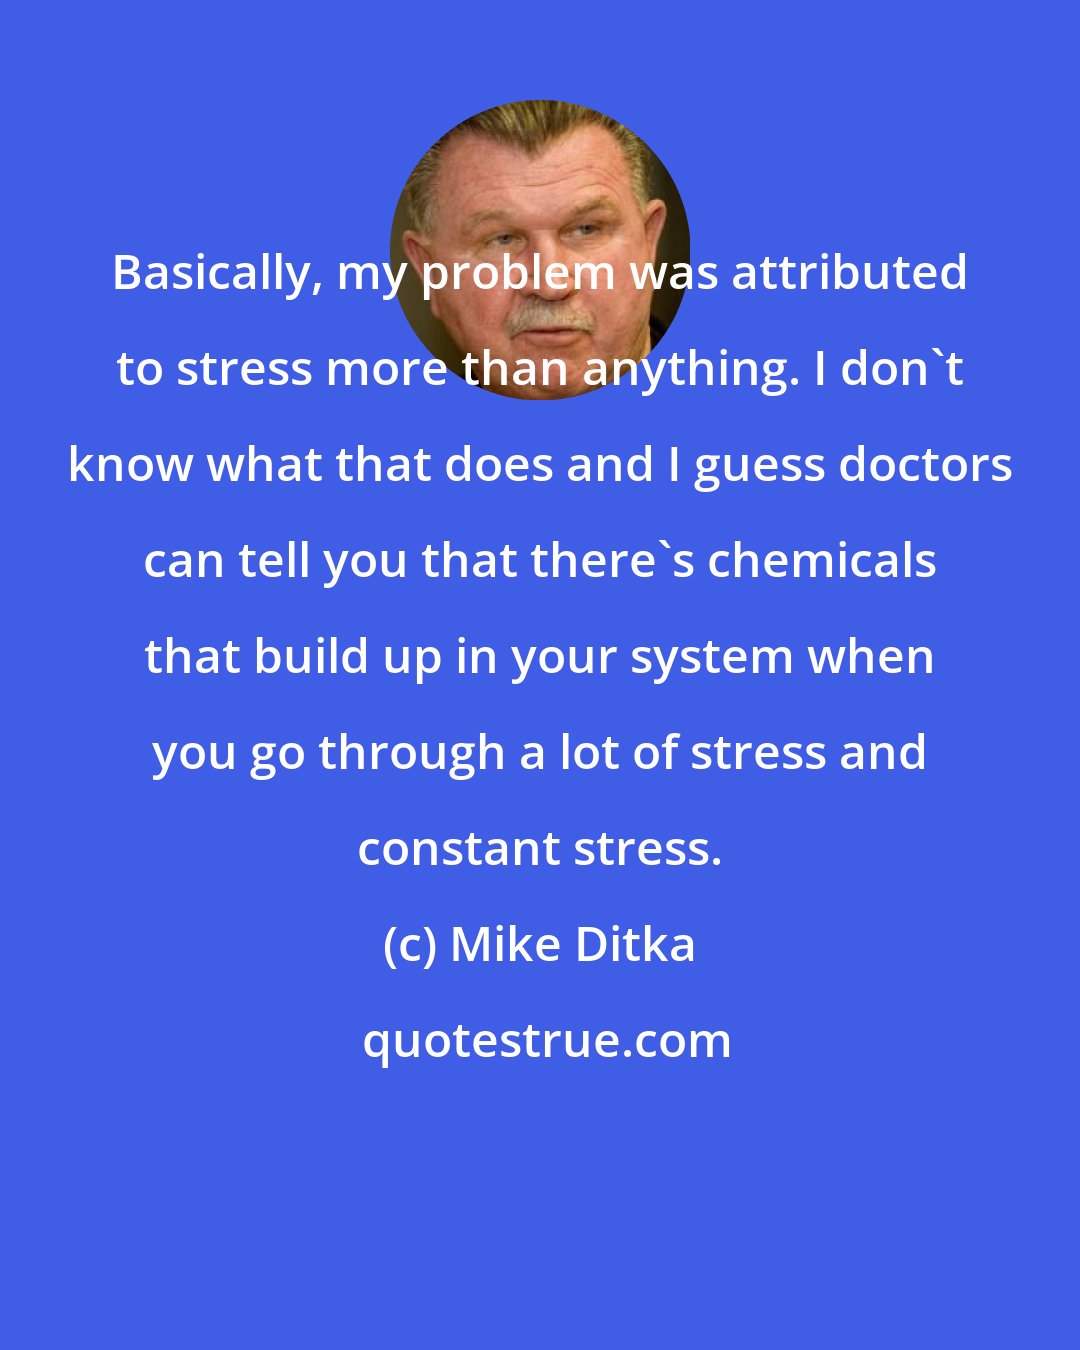 Mike Ditka: Basically, my problem was attributed to stress more than anything. I don't know what that does and I guess doctors can tell you that there's chemicals that build up in your system when you go through a lot of stress and constant stress.